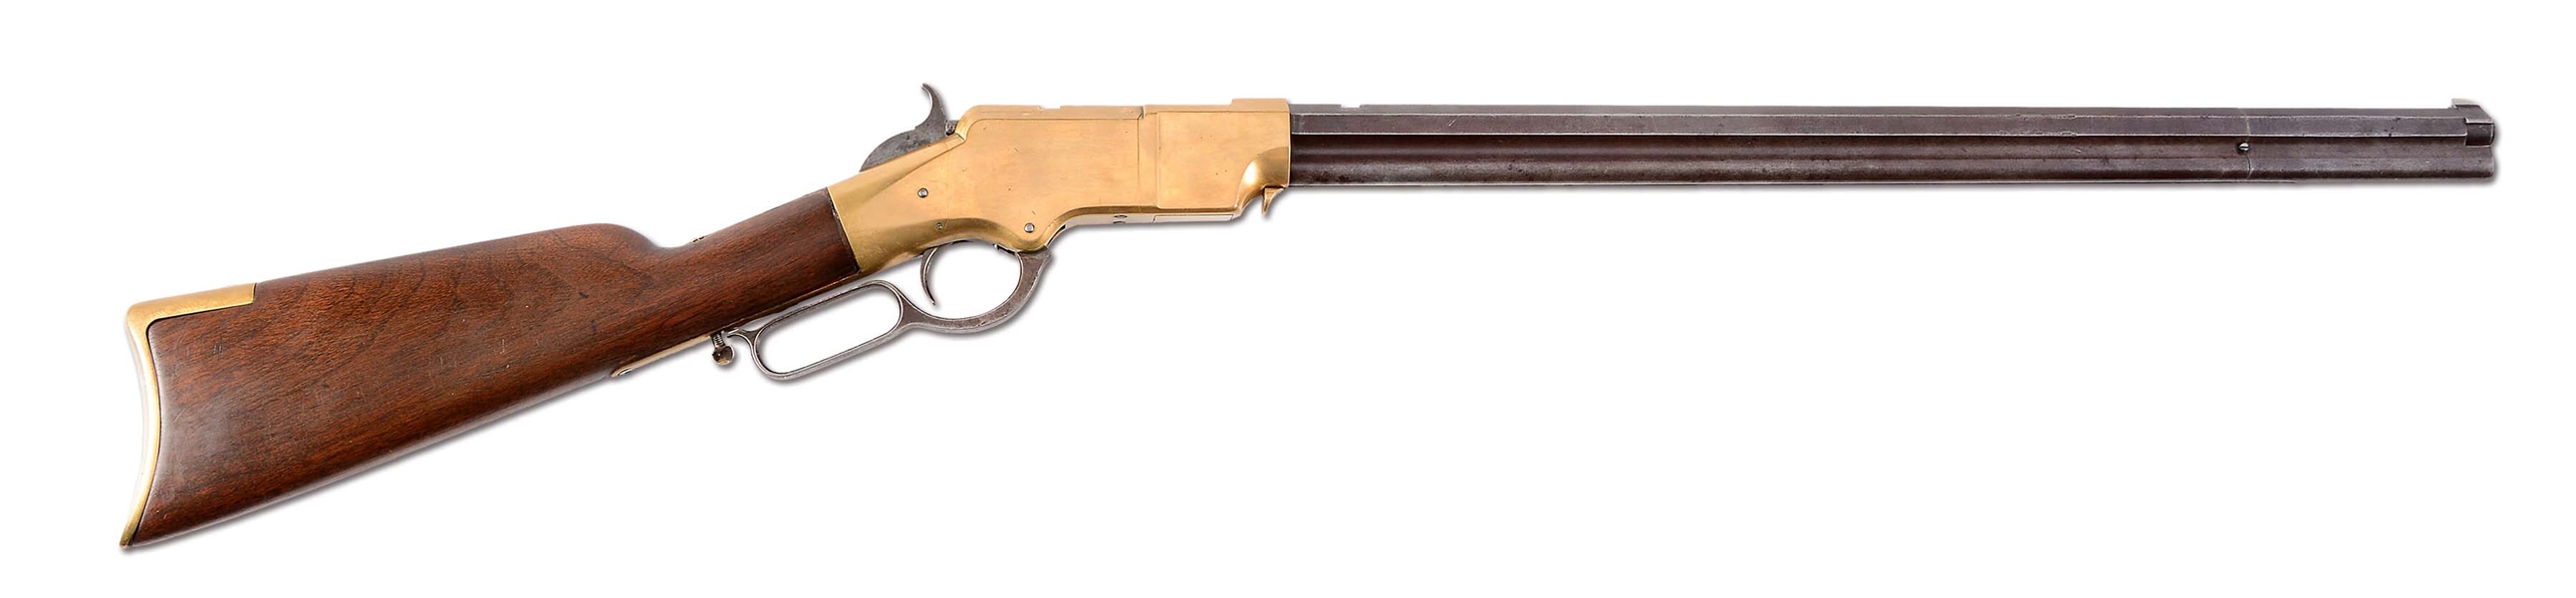 (A) 1863 MANUFACTURED NEW HAVEN ARMS MODEL 1860 HENRY RIFLE (1863).